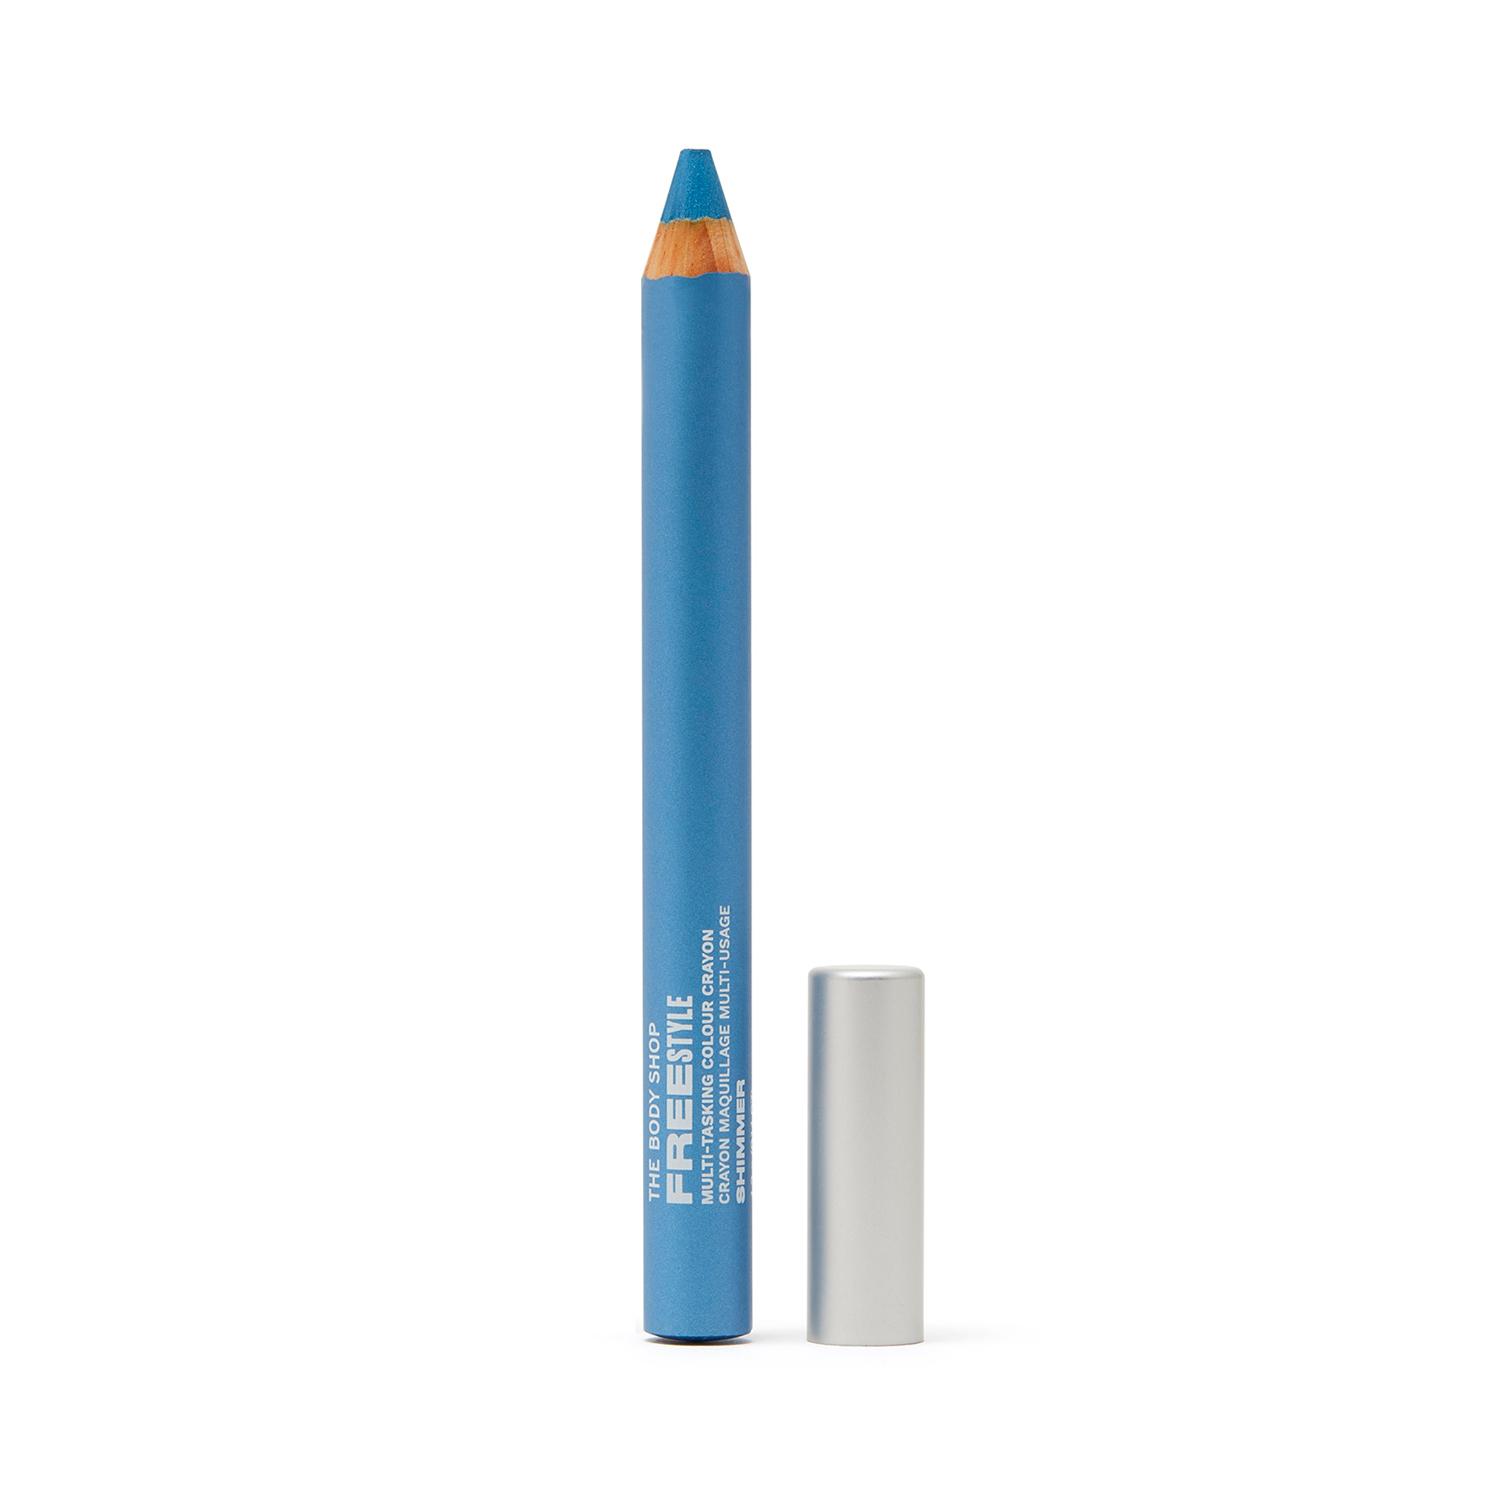 The Body Shop | The Body Shop Freestyle Multi-Tasking Crayons - Empower (4.2 g)